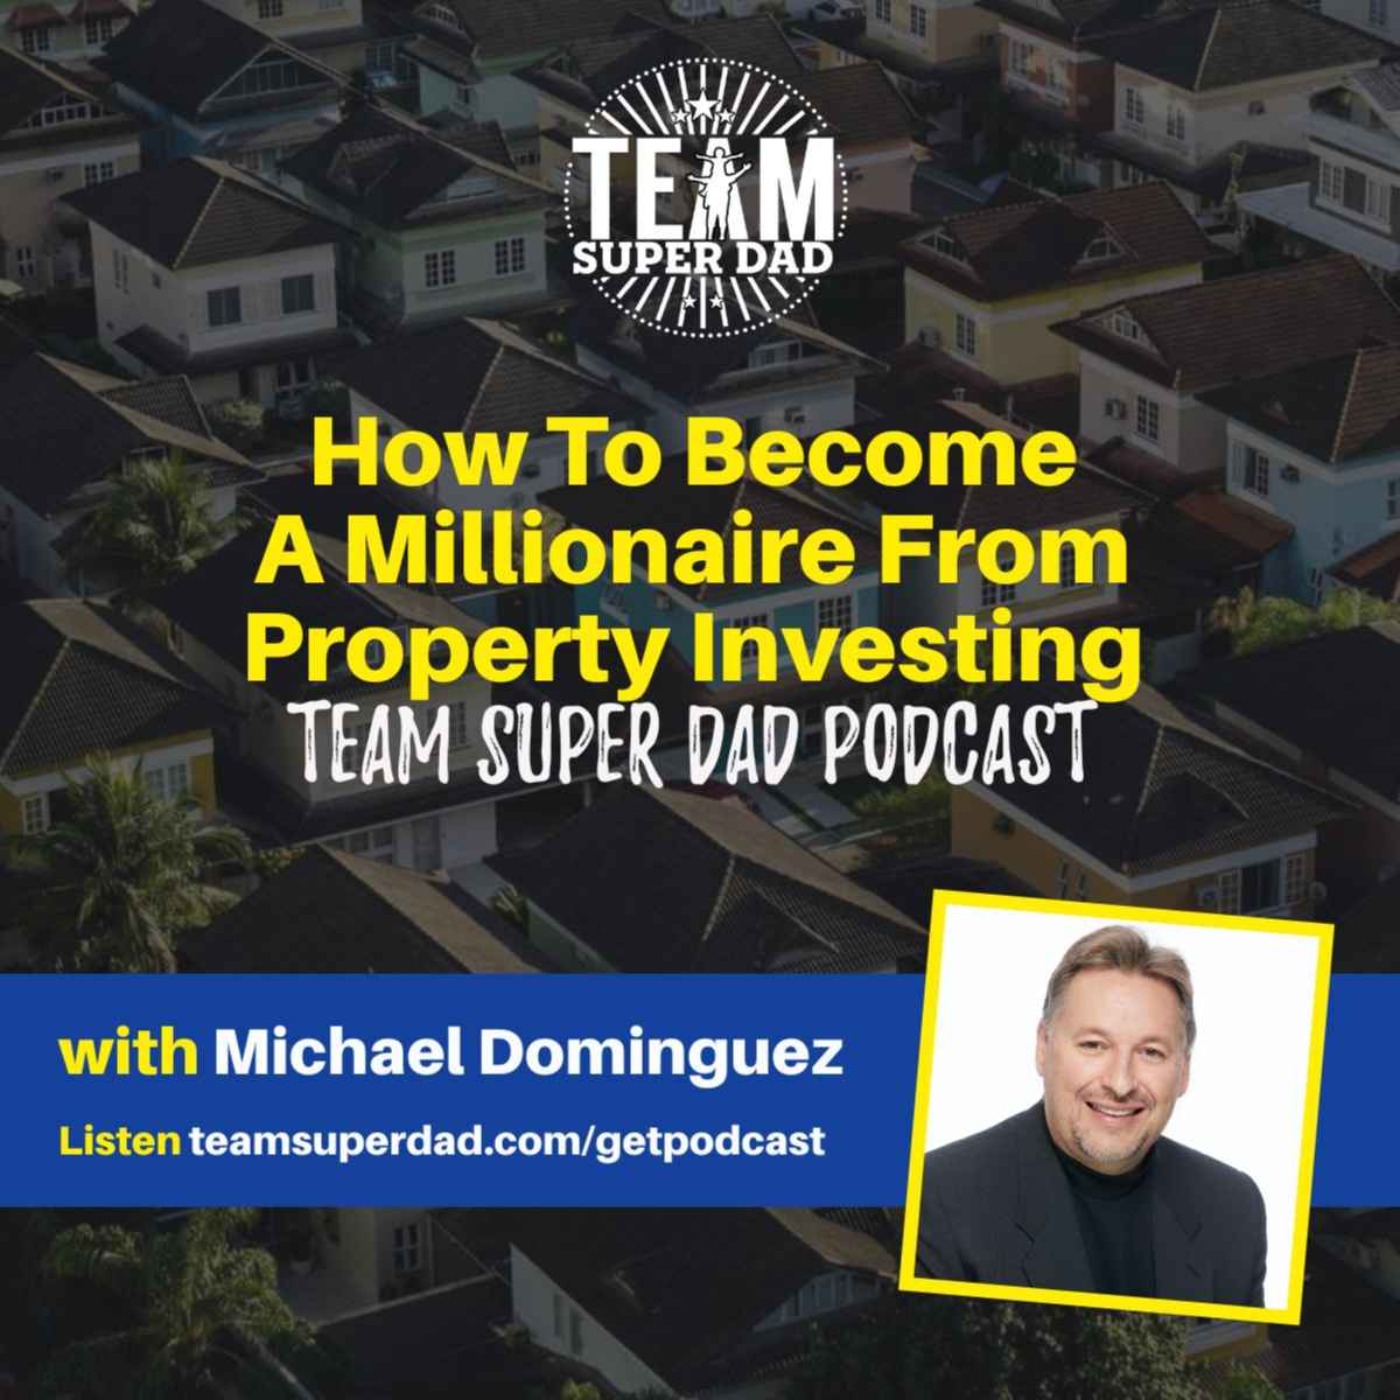 How To Become A Millionaire Through Property Investing with Michael Dominguez